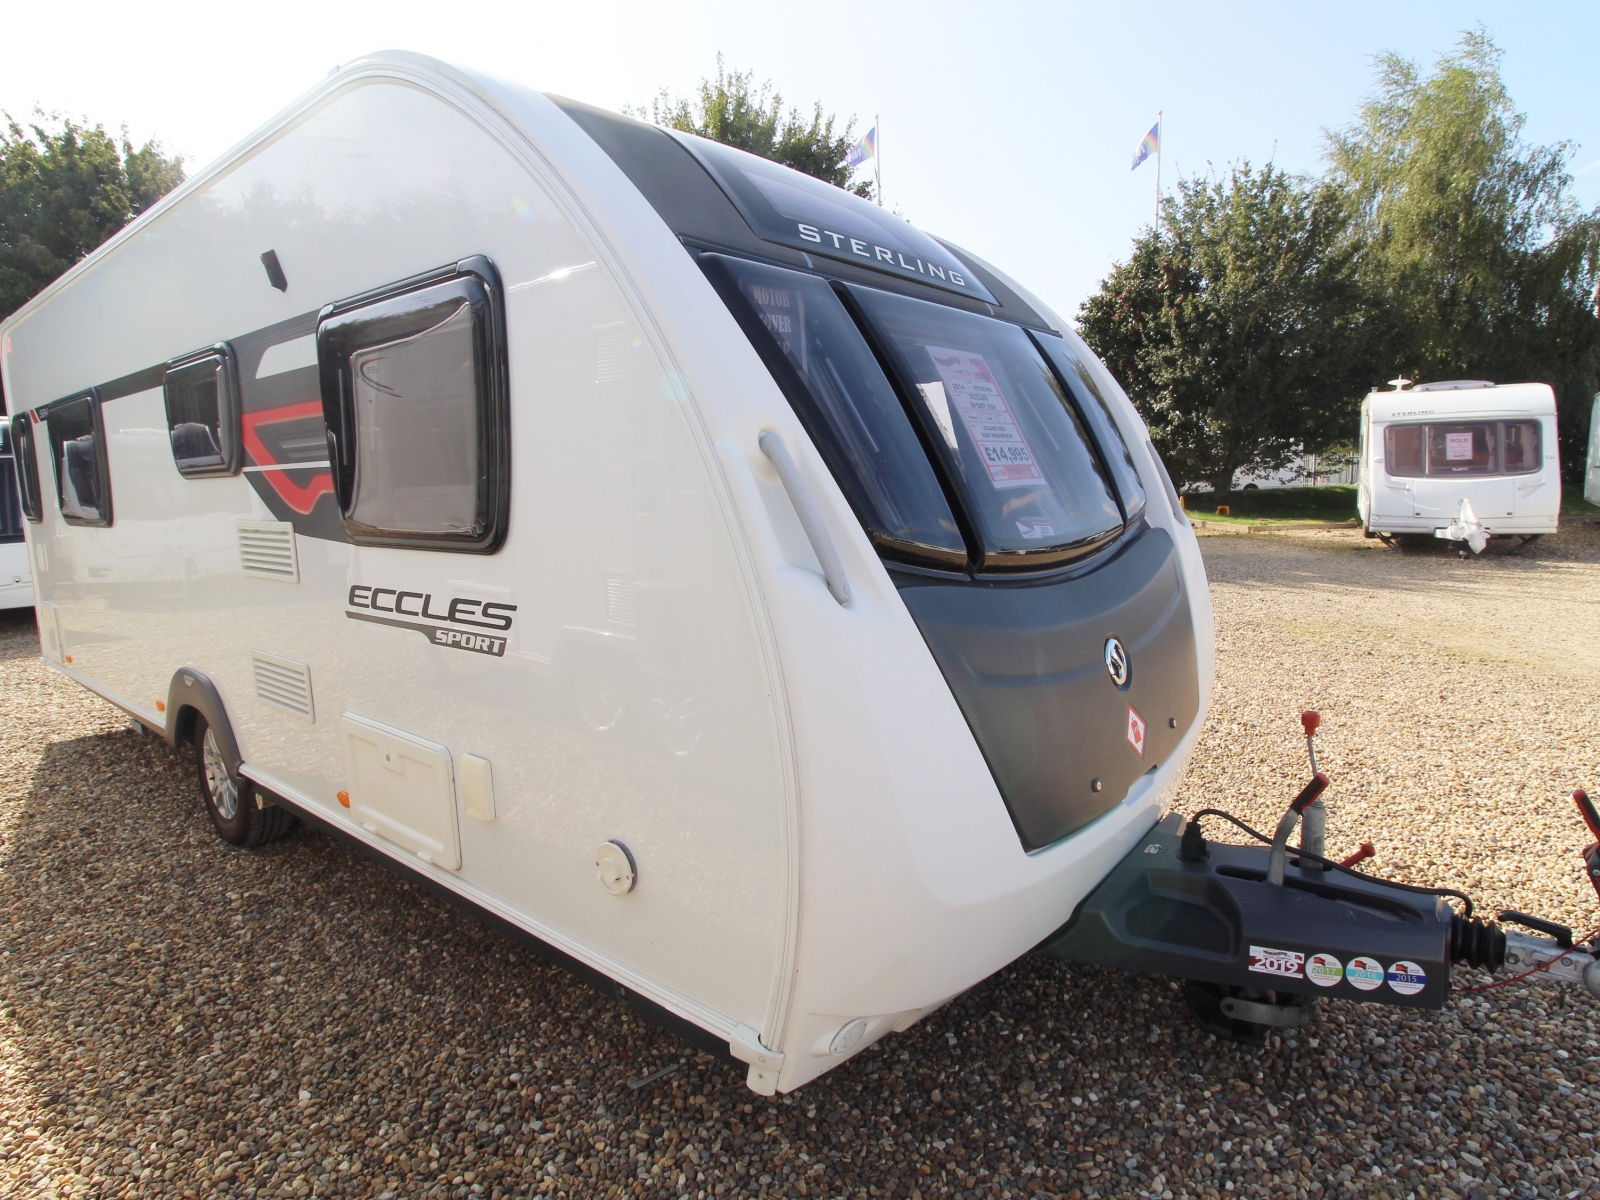 Swift Sterling Eccles 584 Sport 2014 image